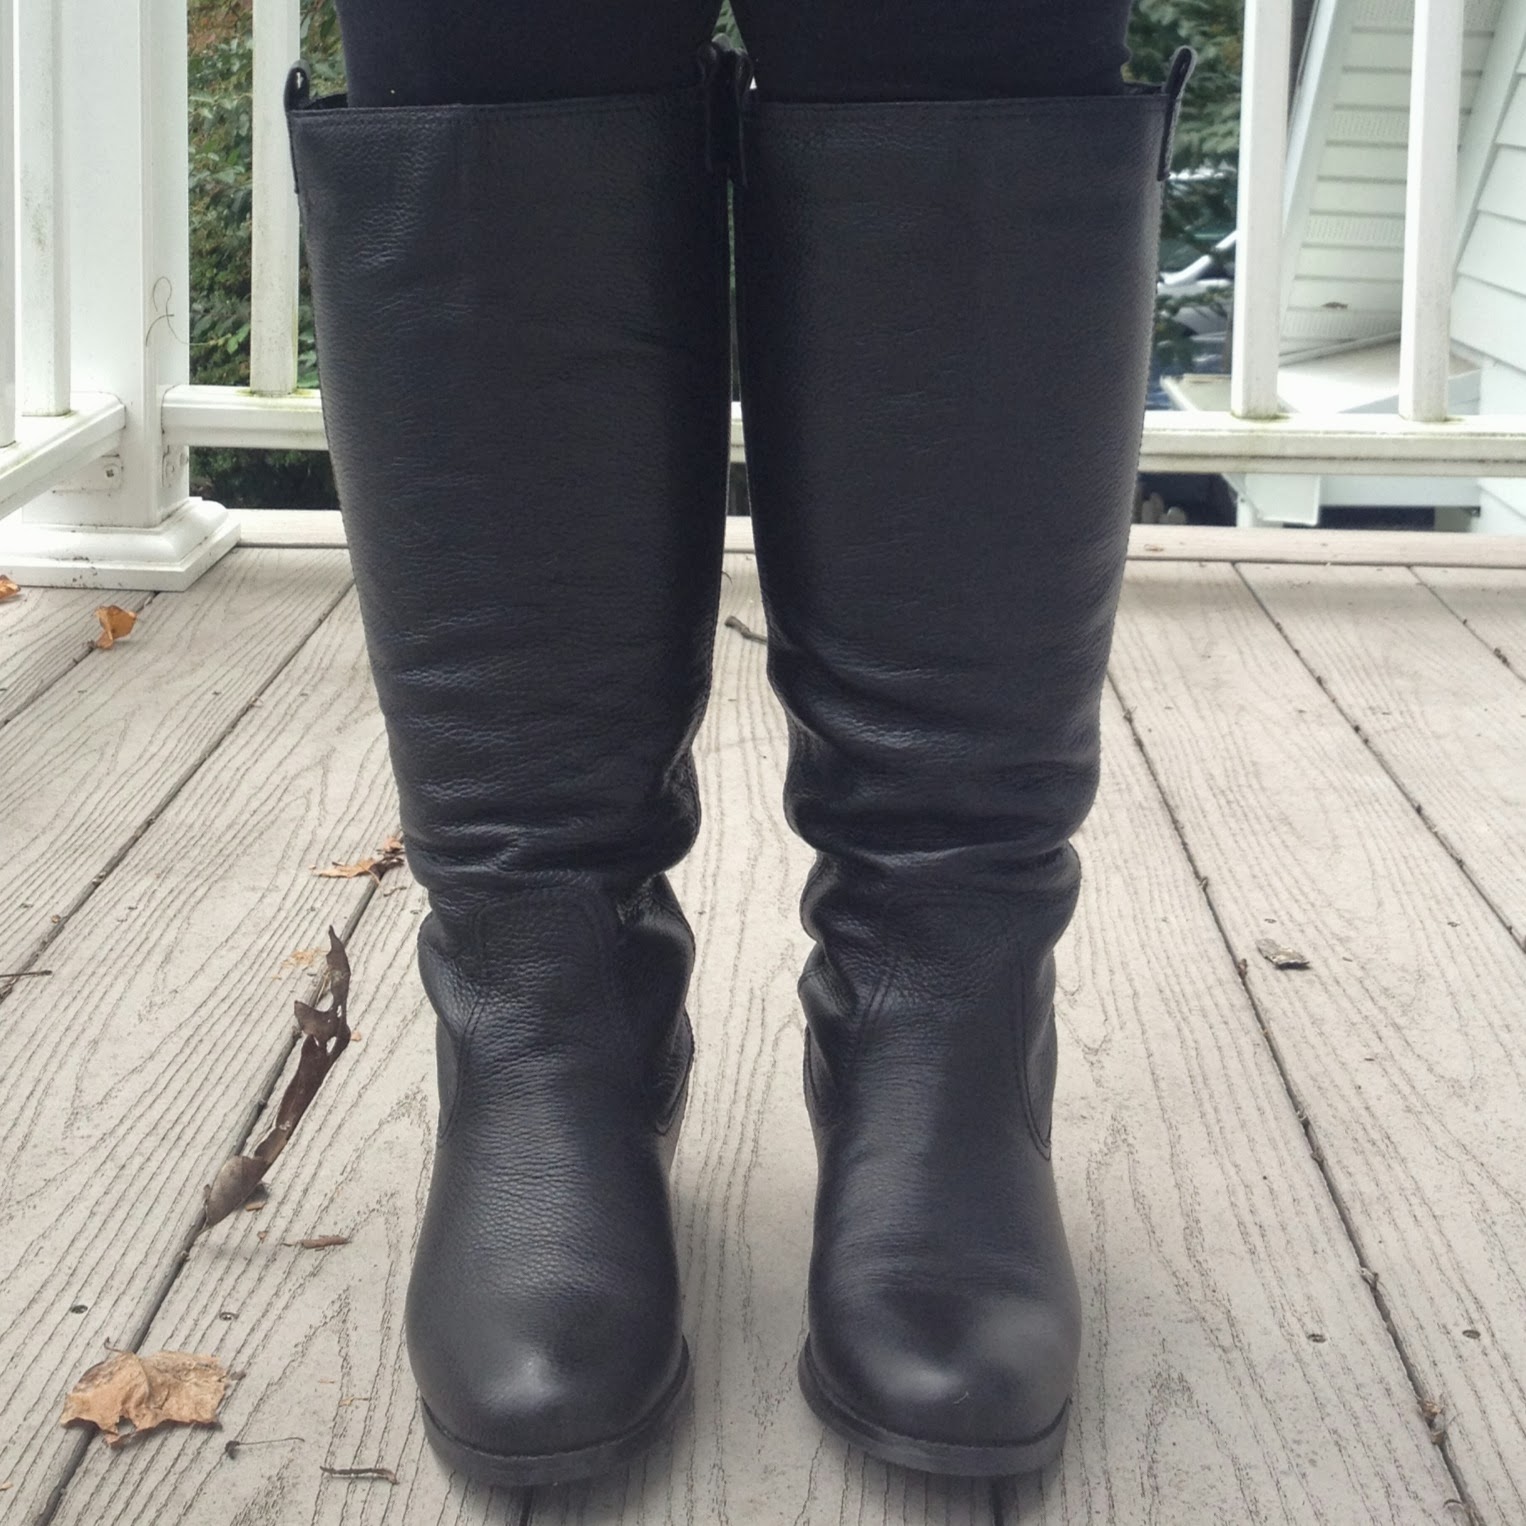 Lola, Tangled: Wide Calf Boots Buying Guide